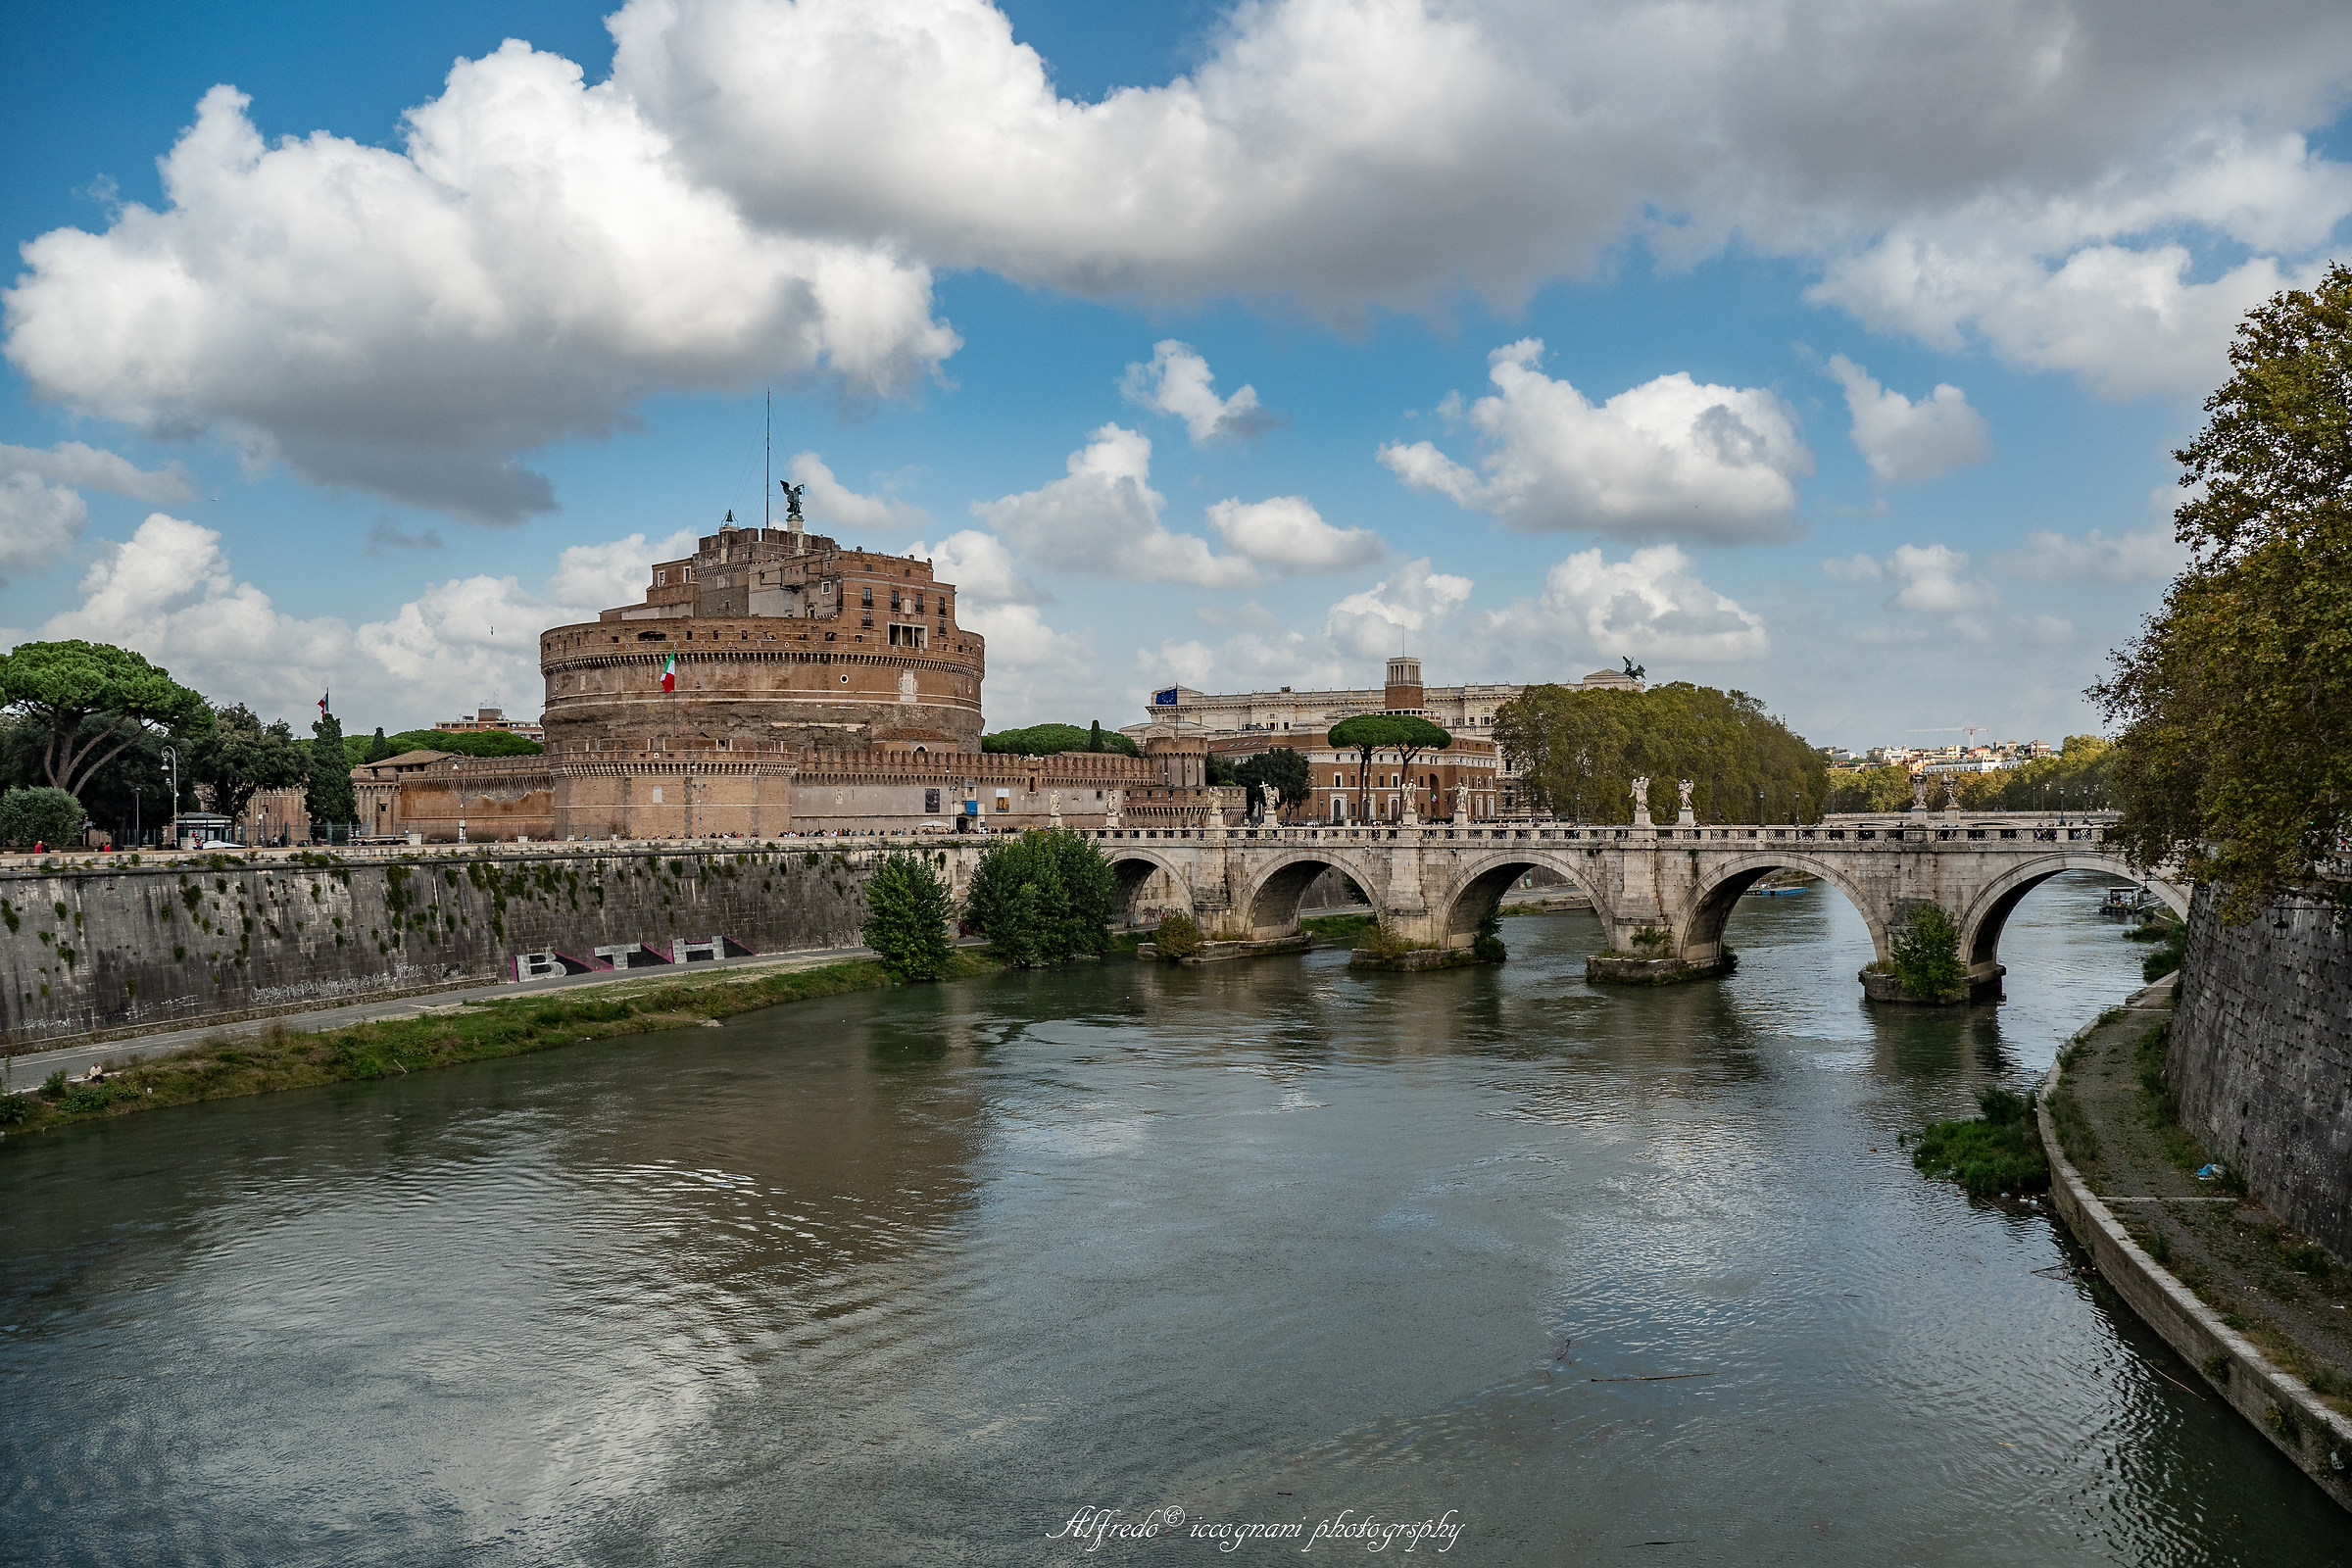 Bridge of Castel Sant'Angelo on the side of St. Peter's...